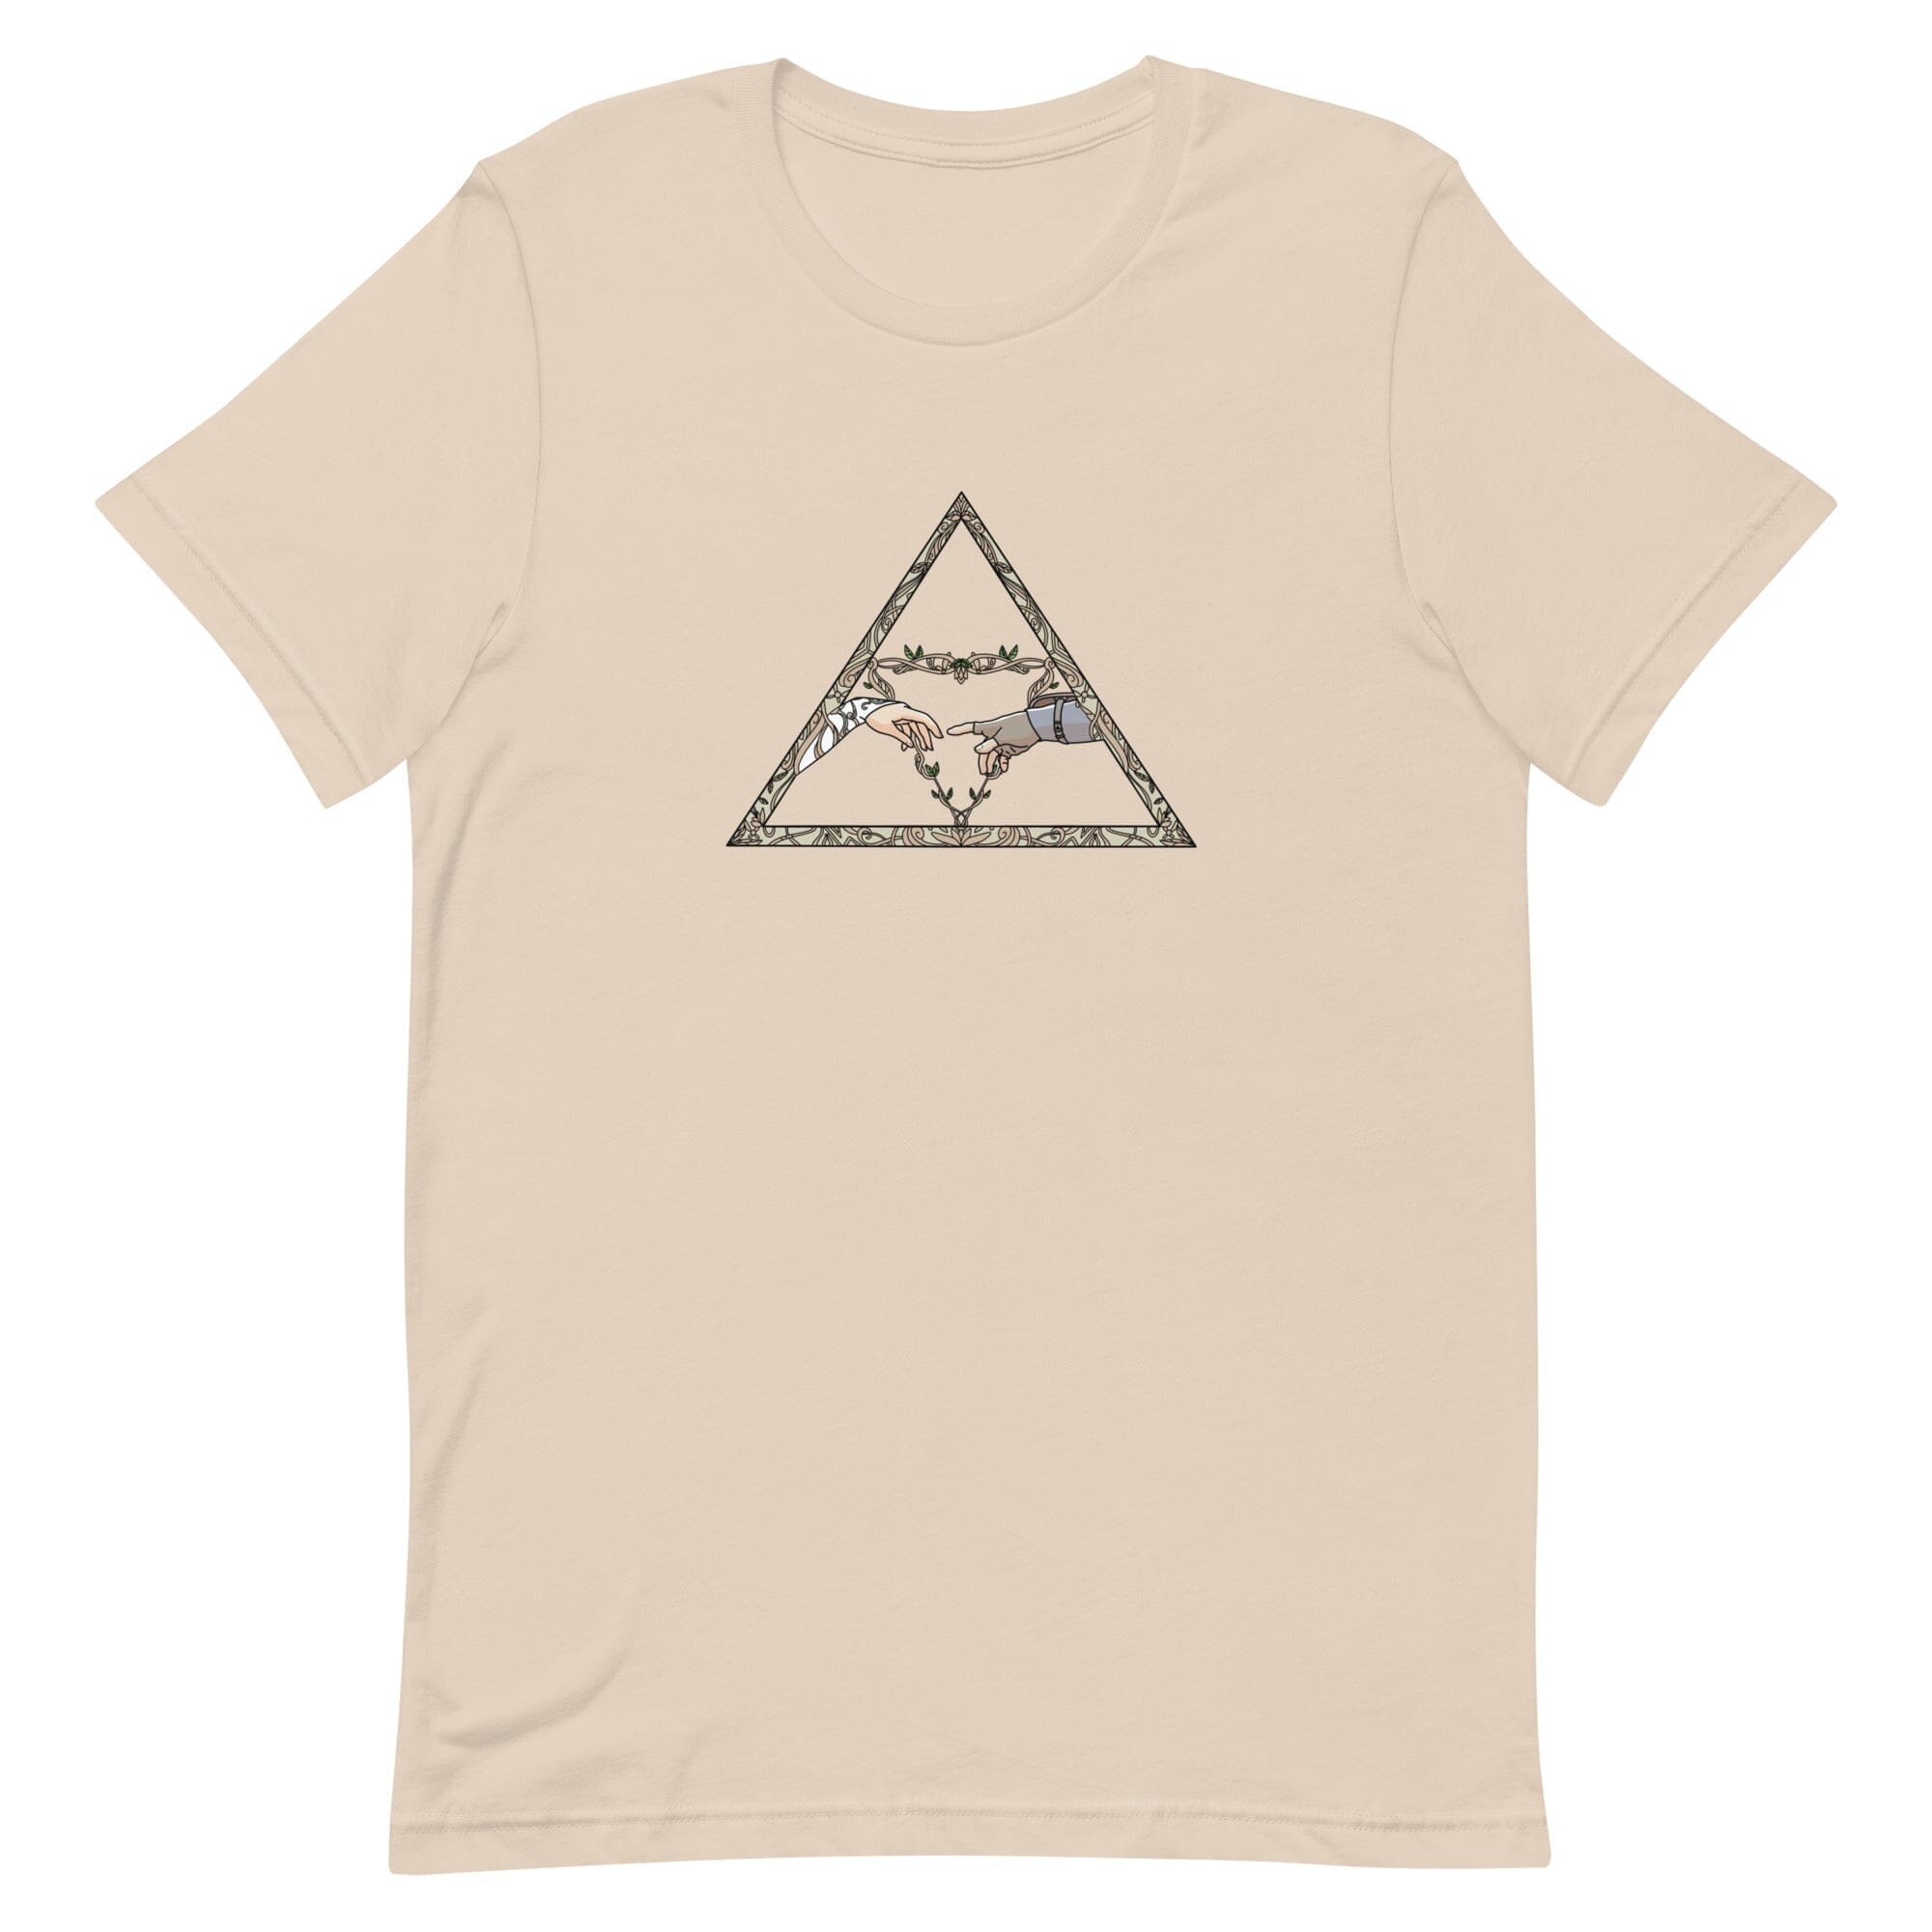 The Creation | Short-Sleeve Unisex T-Shirt | The Legend of Zelda T-Shirt Threads and Thistles Inventory Soft Cream S 